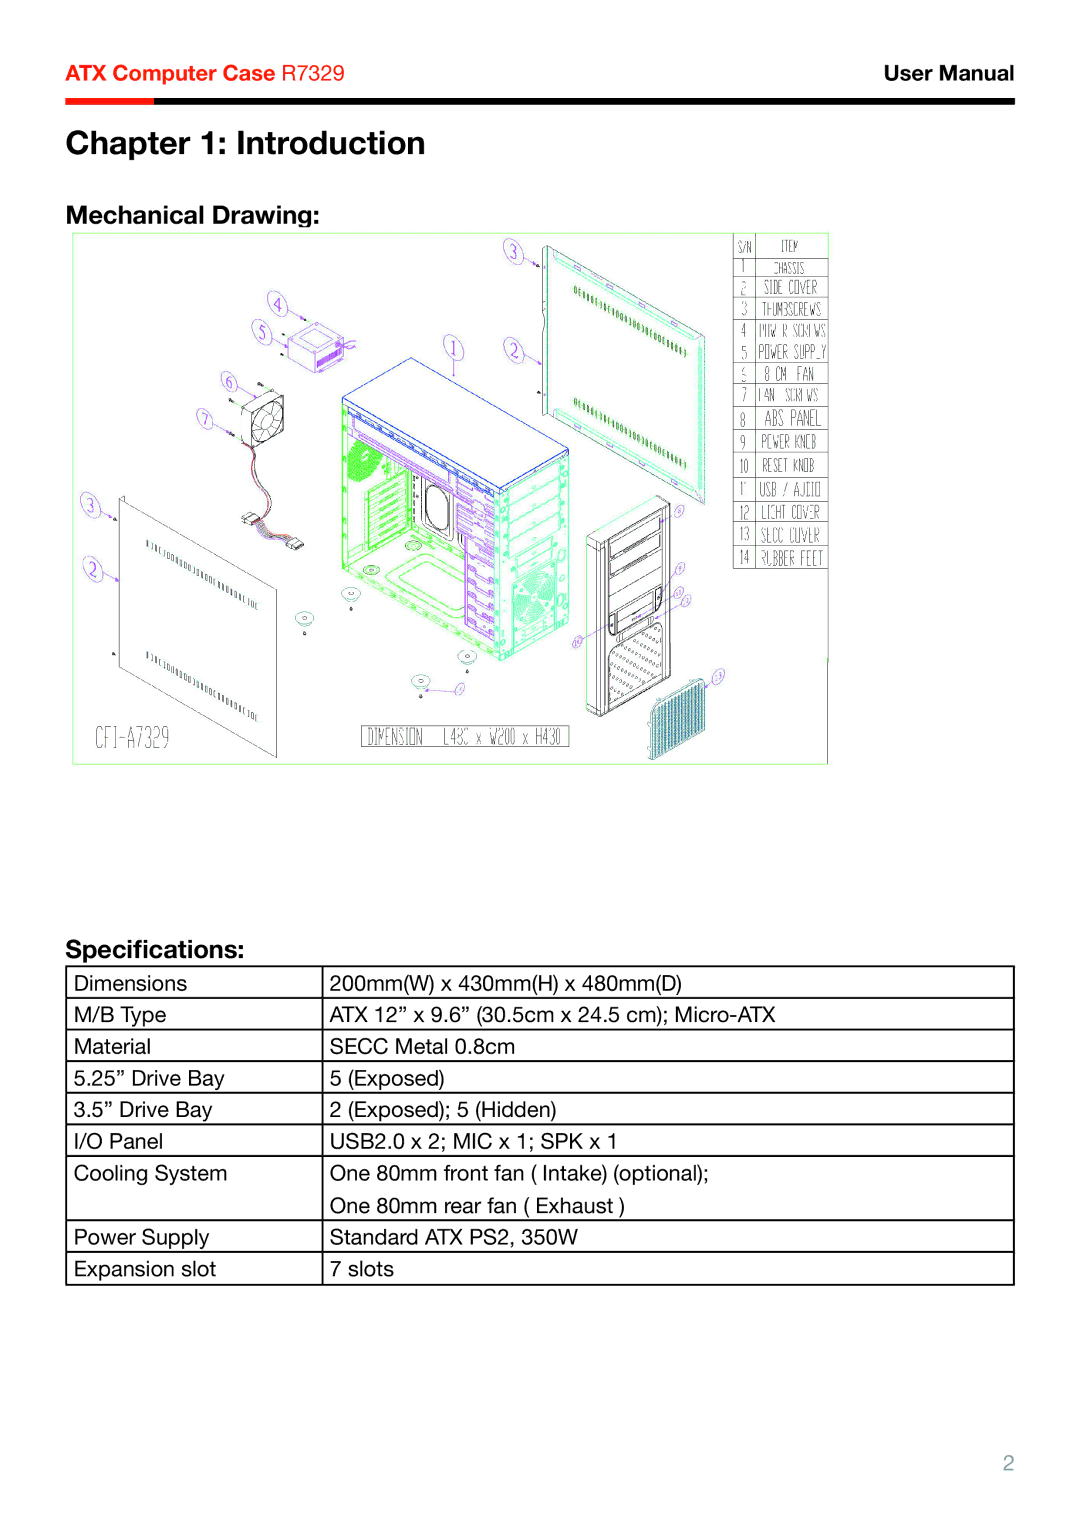 Rosewill R7329 user manual Introduction, Mechanical Drawing Speciﬁcations 